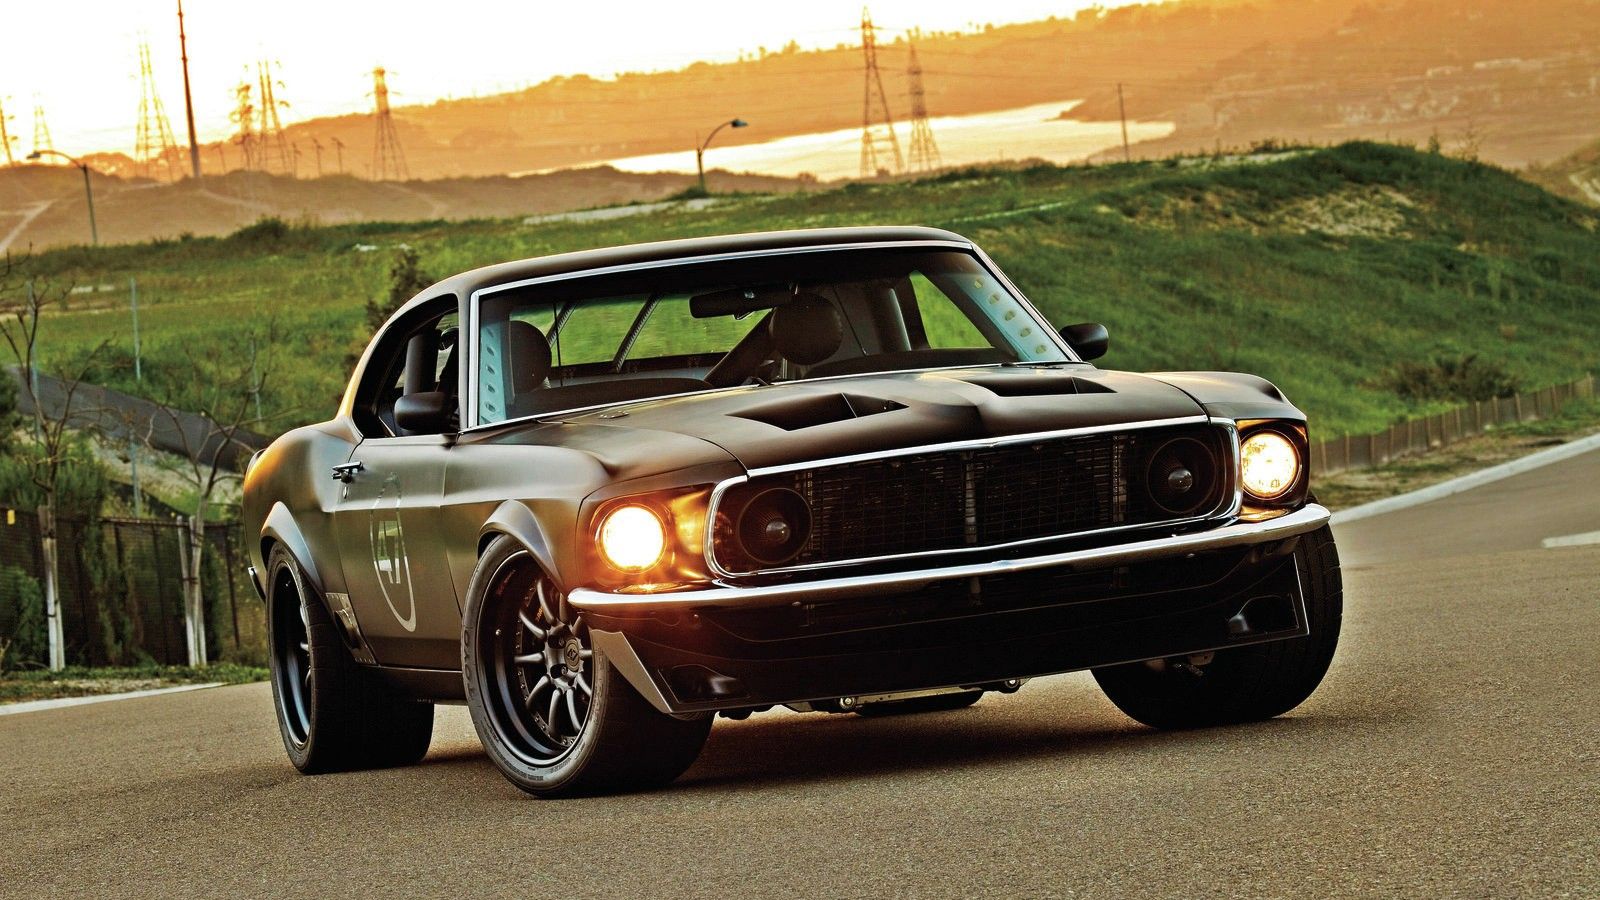 #hot, #Car, #Classic, #muscle, #Mustang, #rods, #Ford